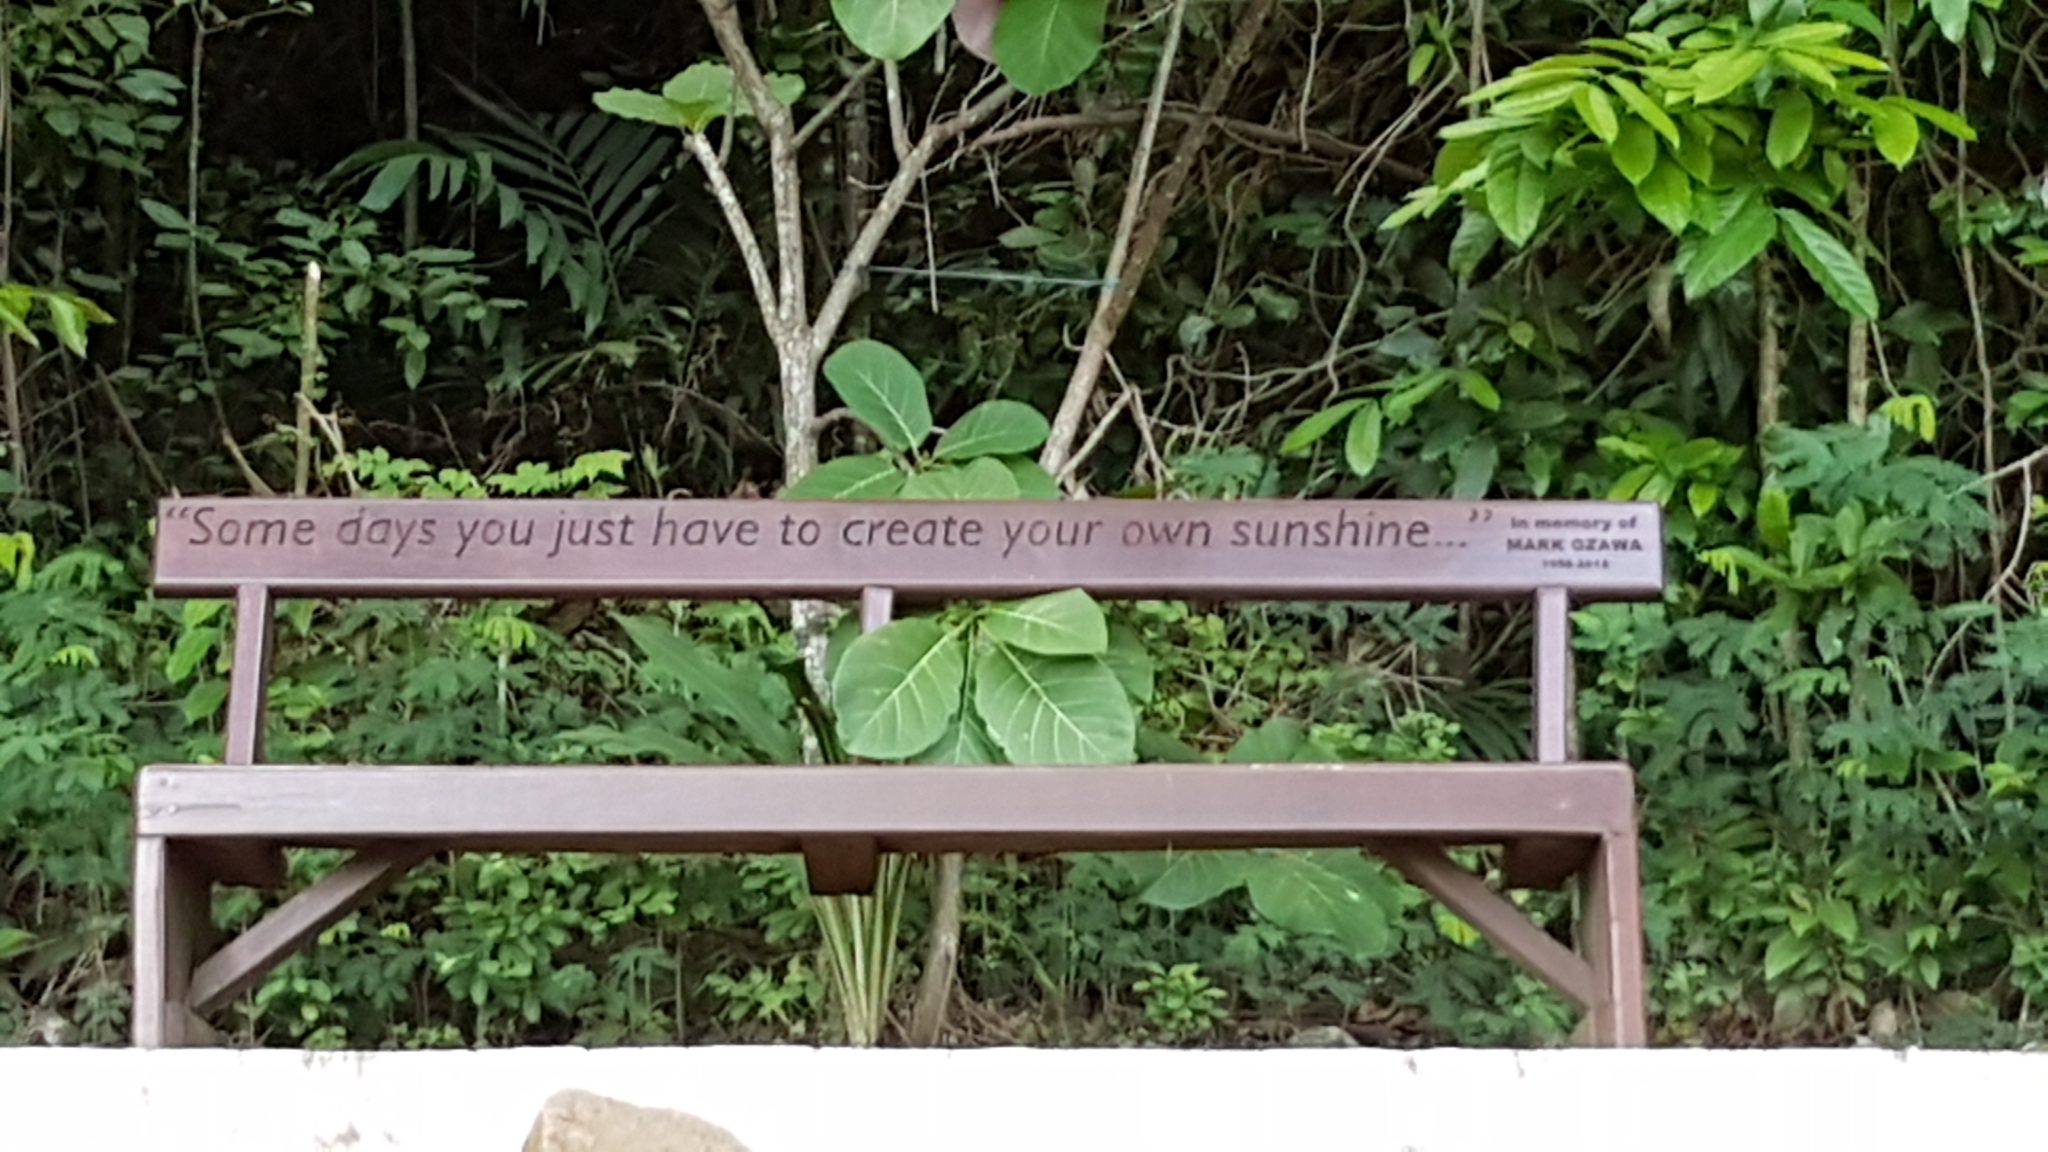 Inspirational quoute on bench